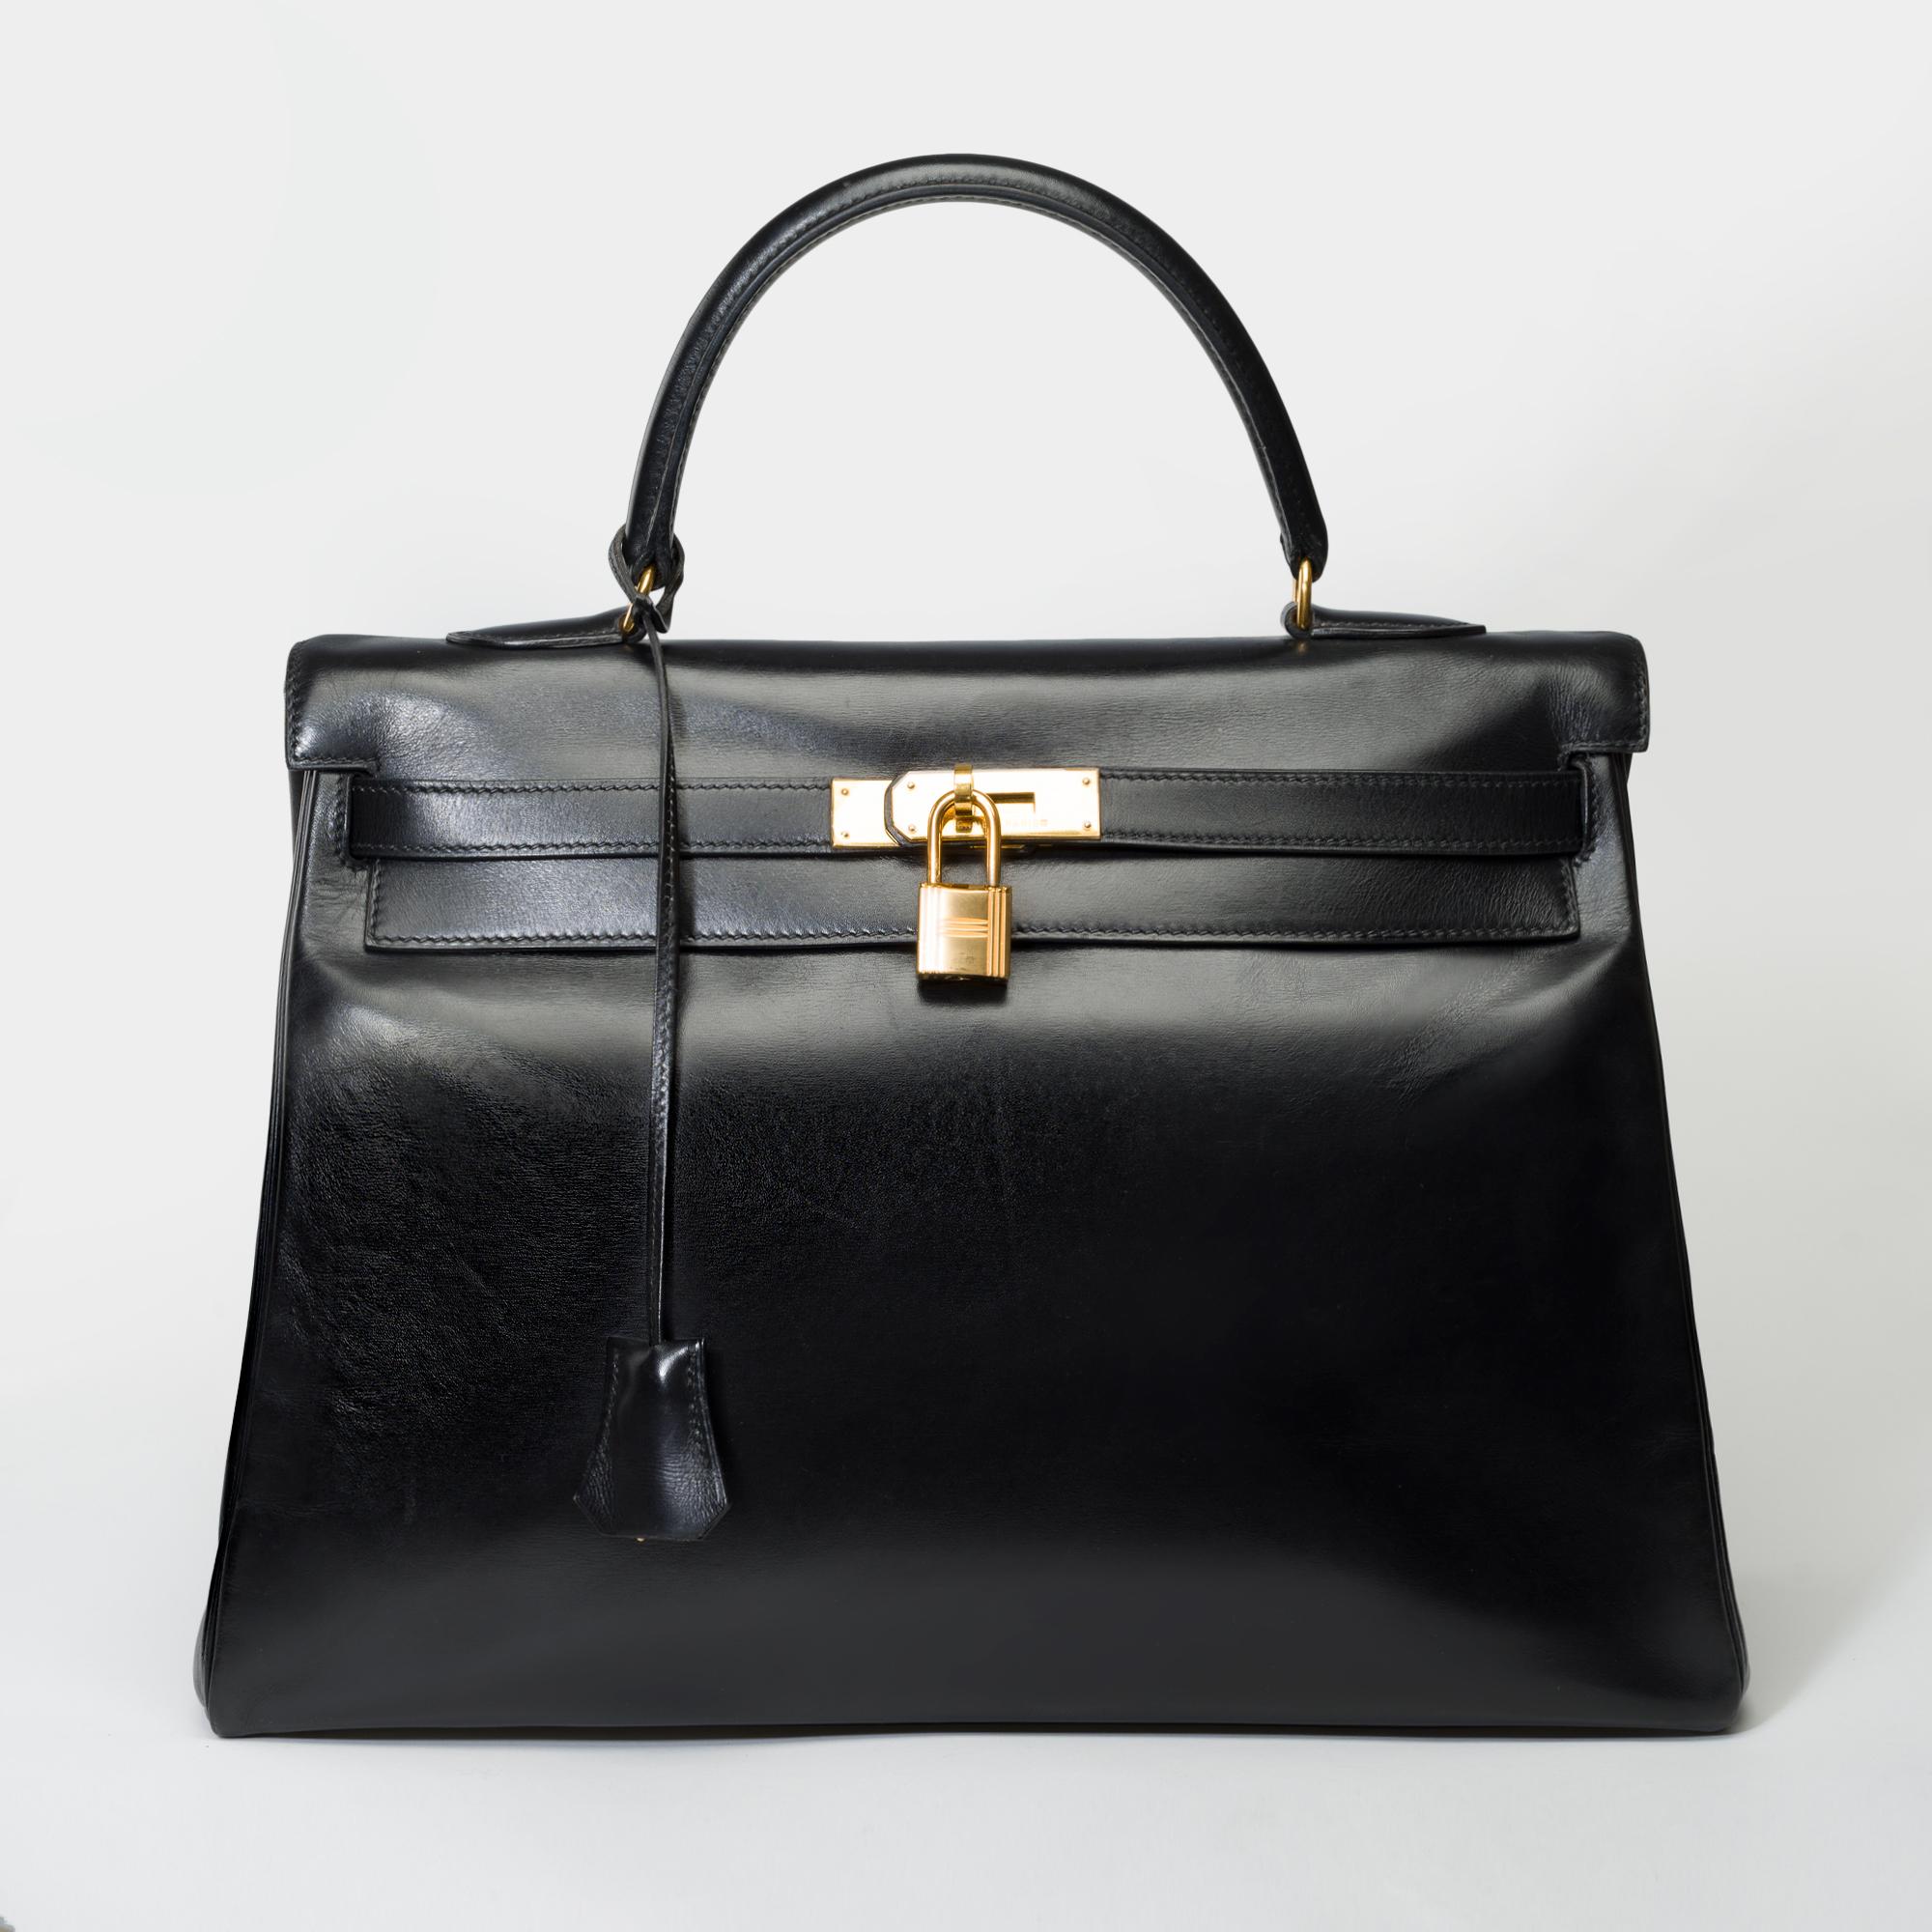 Beautiful Hermes Kelly 35 retourne handbag strap in black box calfskin leather, gold plated metal hardware, black leather handle, removable black leather shoulder strap for hand or shoulder carry

Flap closure
Black leather lining, one zippered